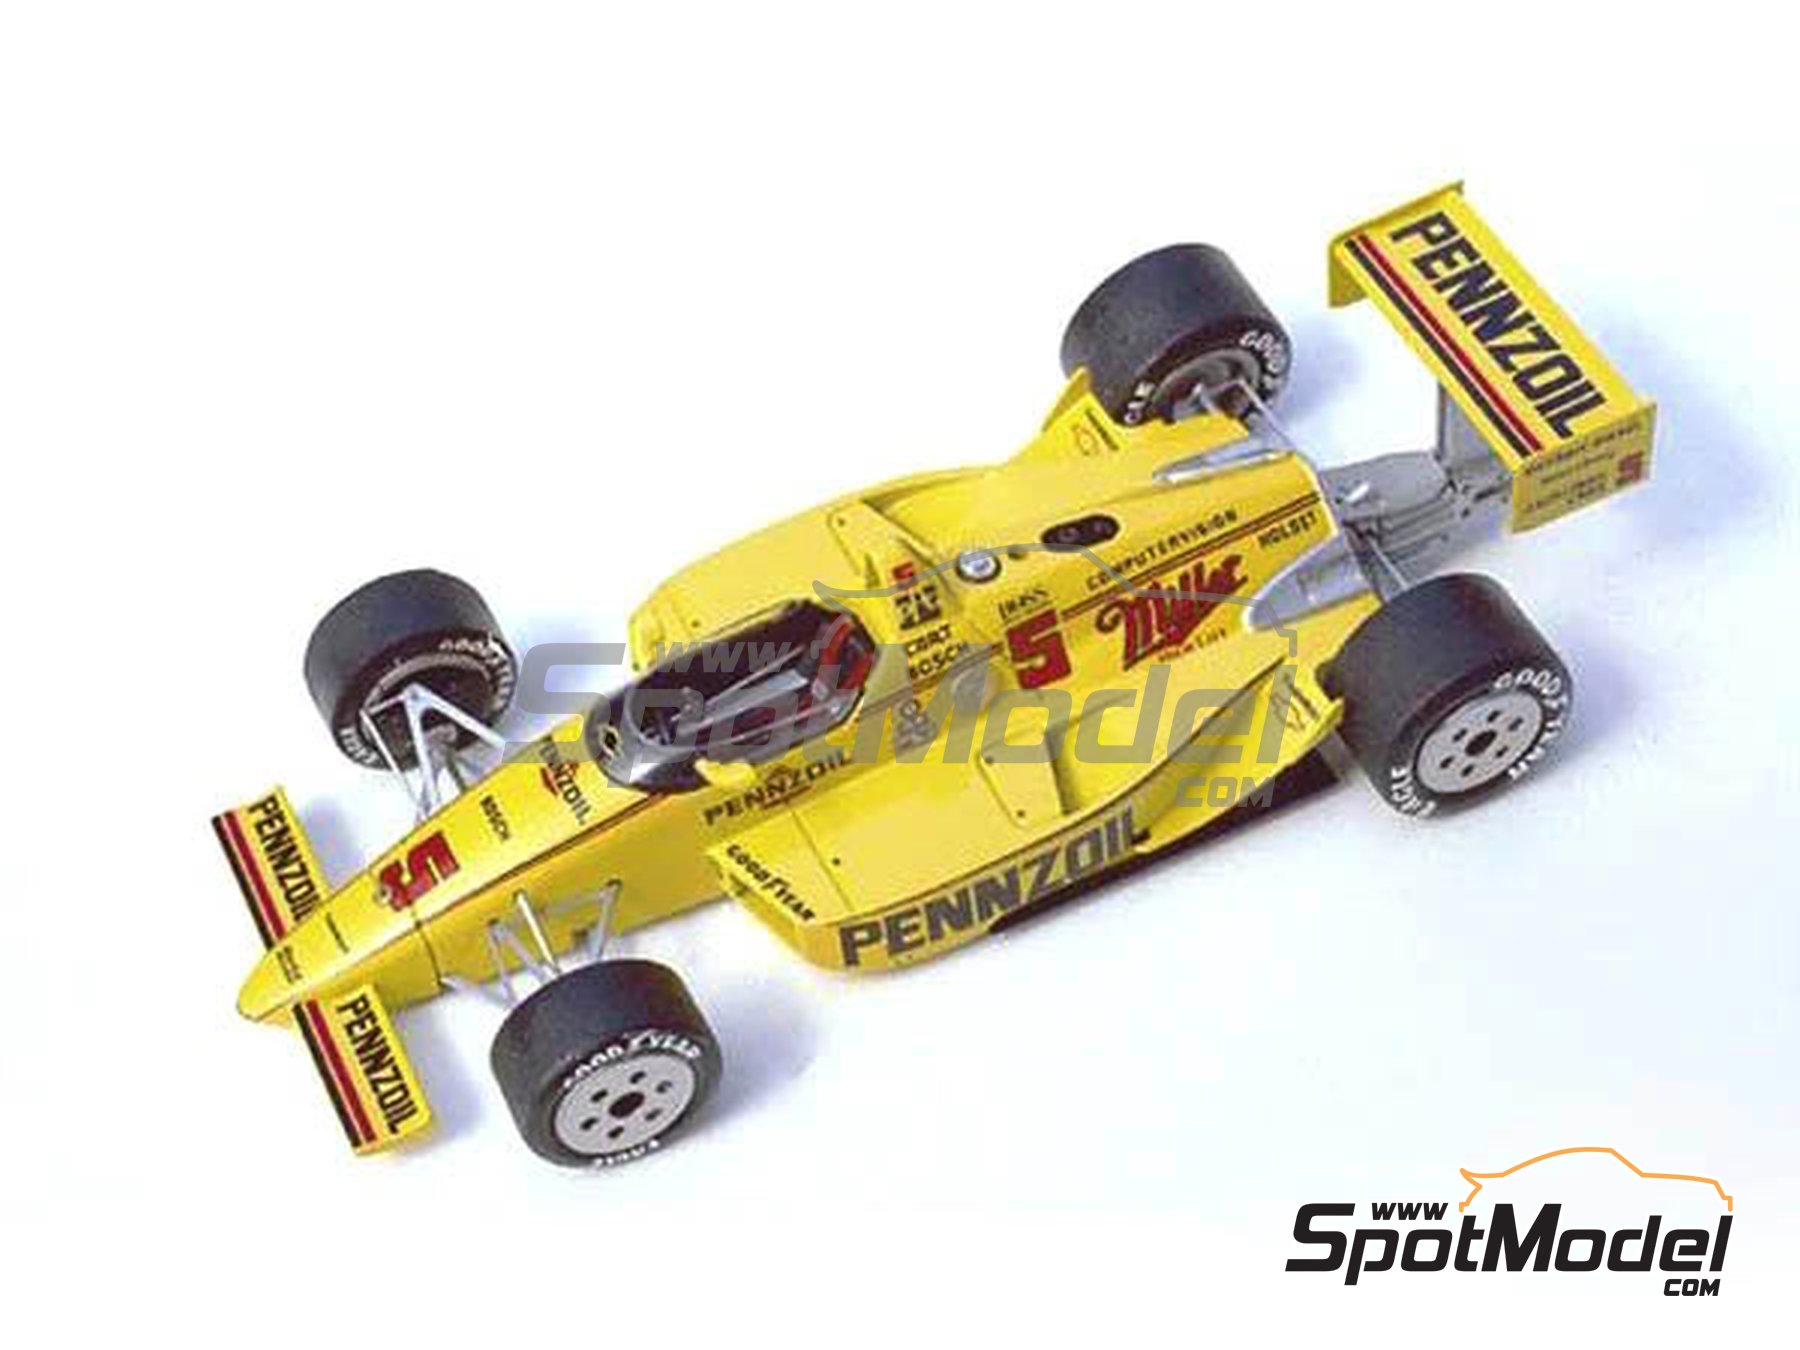 Penske Chevy PC17 Pennzoil Penske Team sponsored by Pennzoil Miller - Indy  1988. Car scale model kit in 1/43 scale manufactured by Tameo Kits (ref. TI